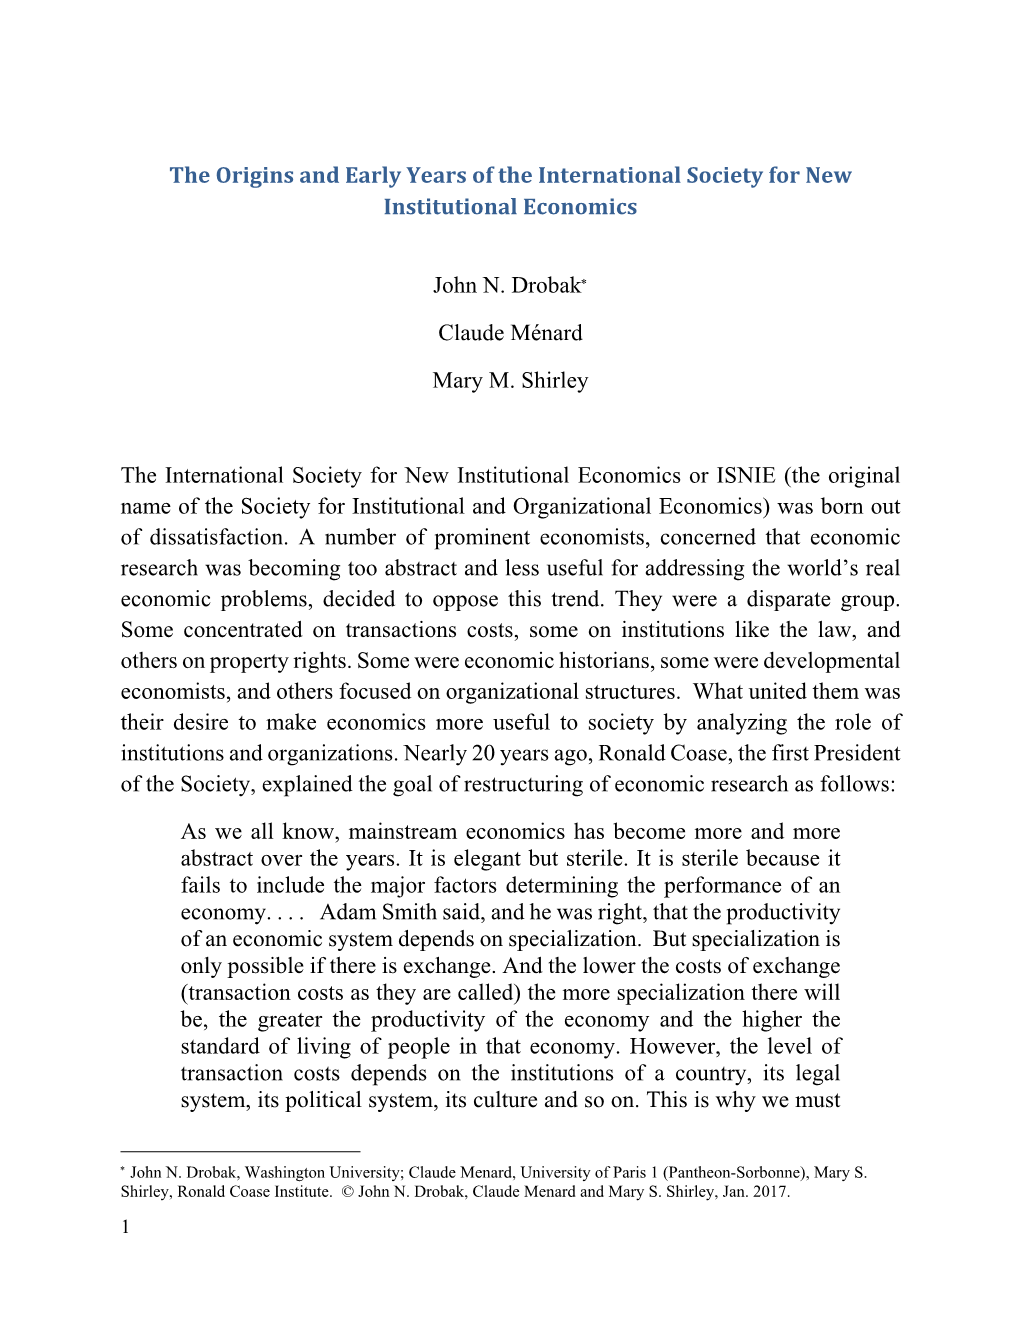 The Origins and Early Years of the International Society for New Institutional Economics